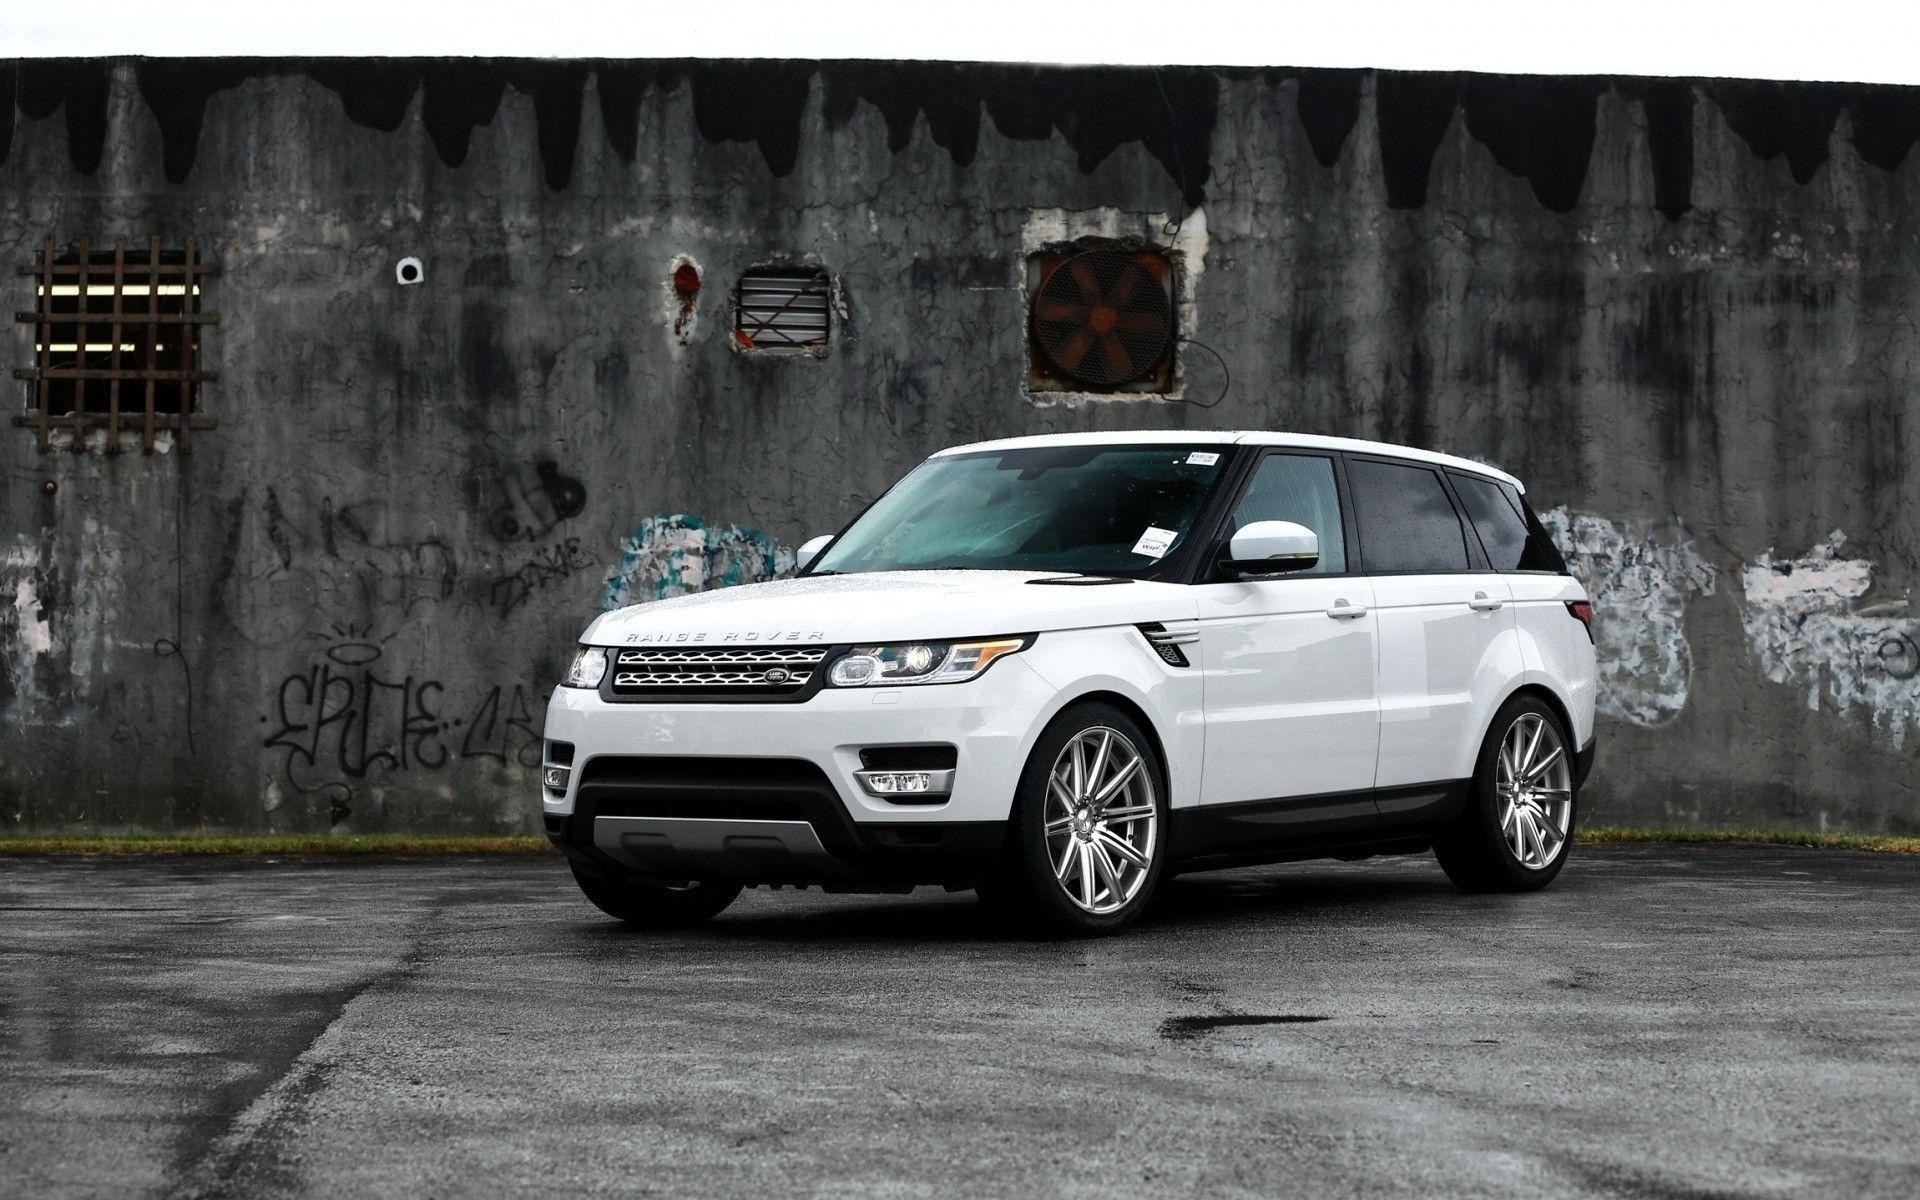 Gorgeous White Range Rover Sport. Android wallpaper for free